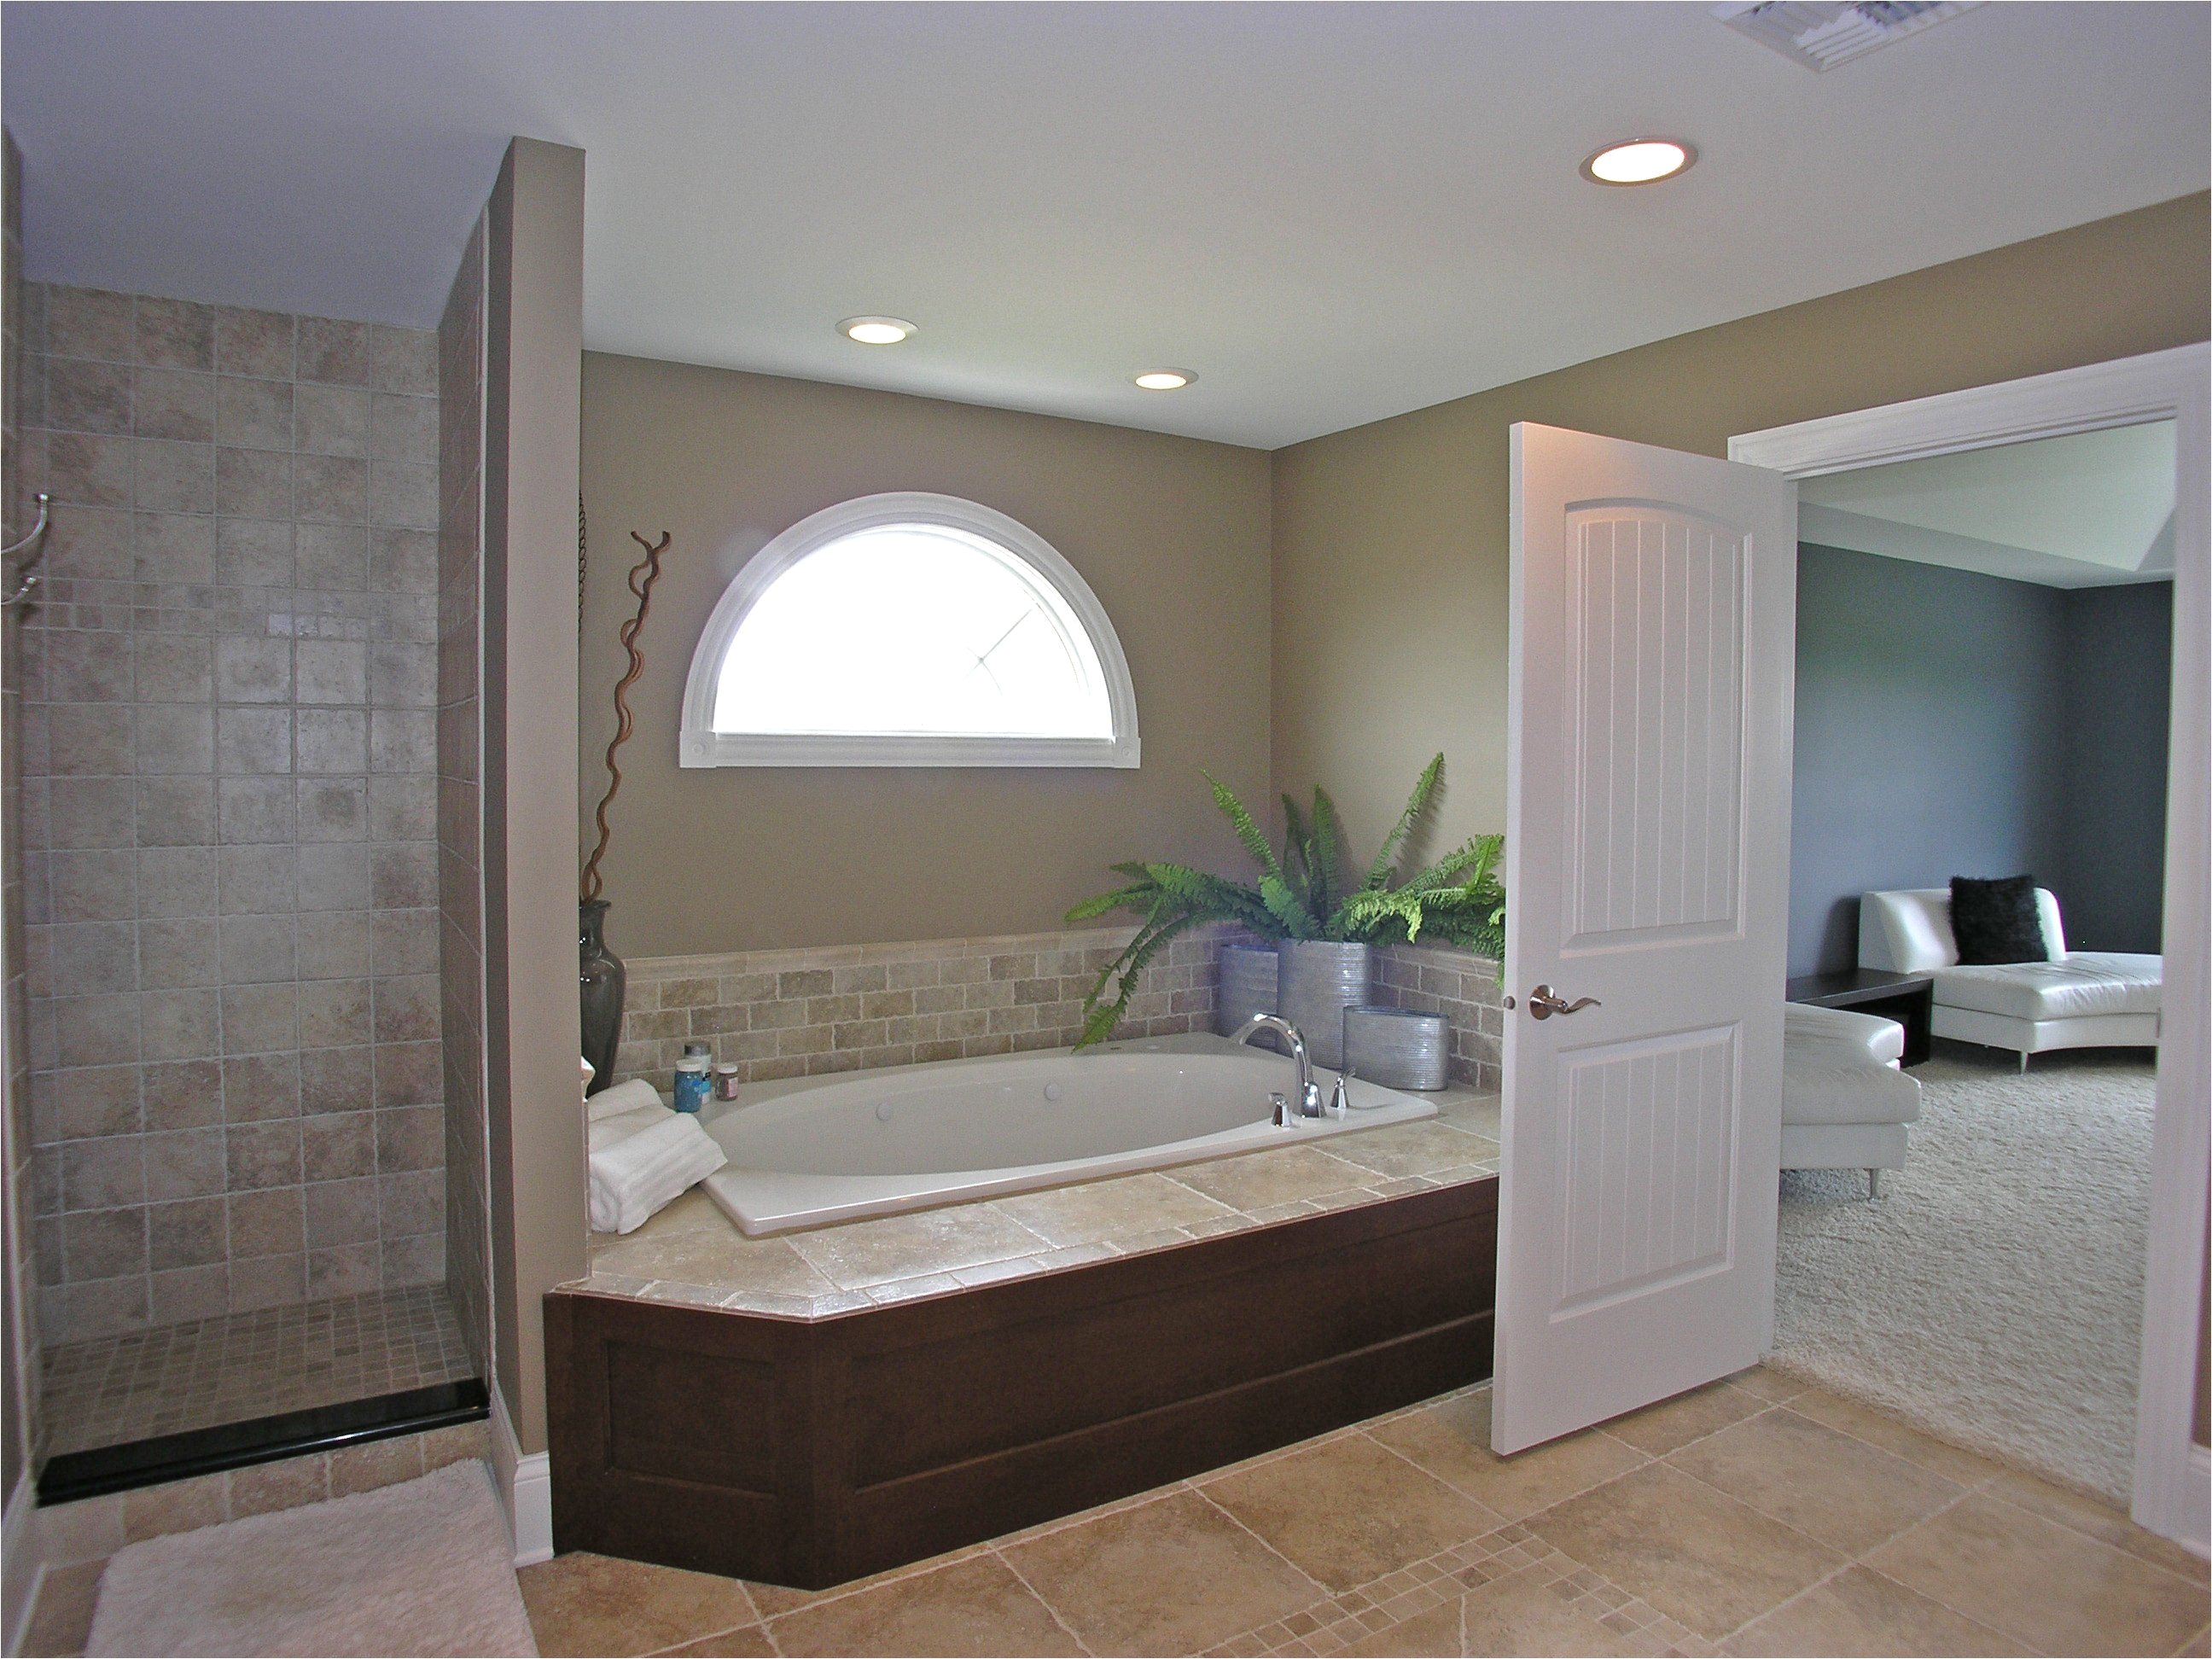 Whirlpool Bathroom Design Ideas Master Bath with Whirlpool Tub and Separate Shower Stall